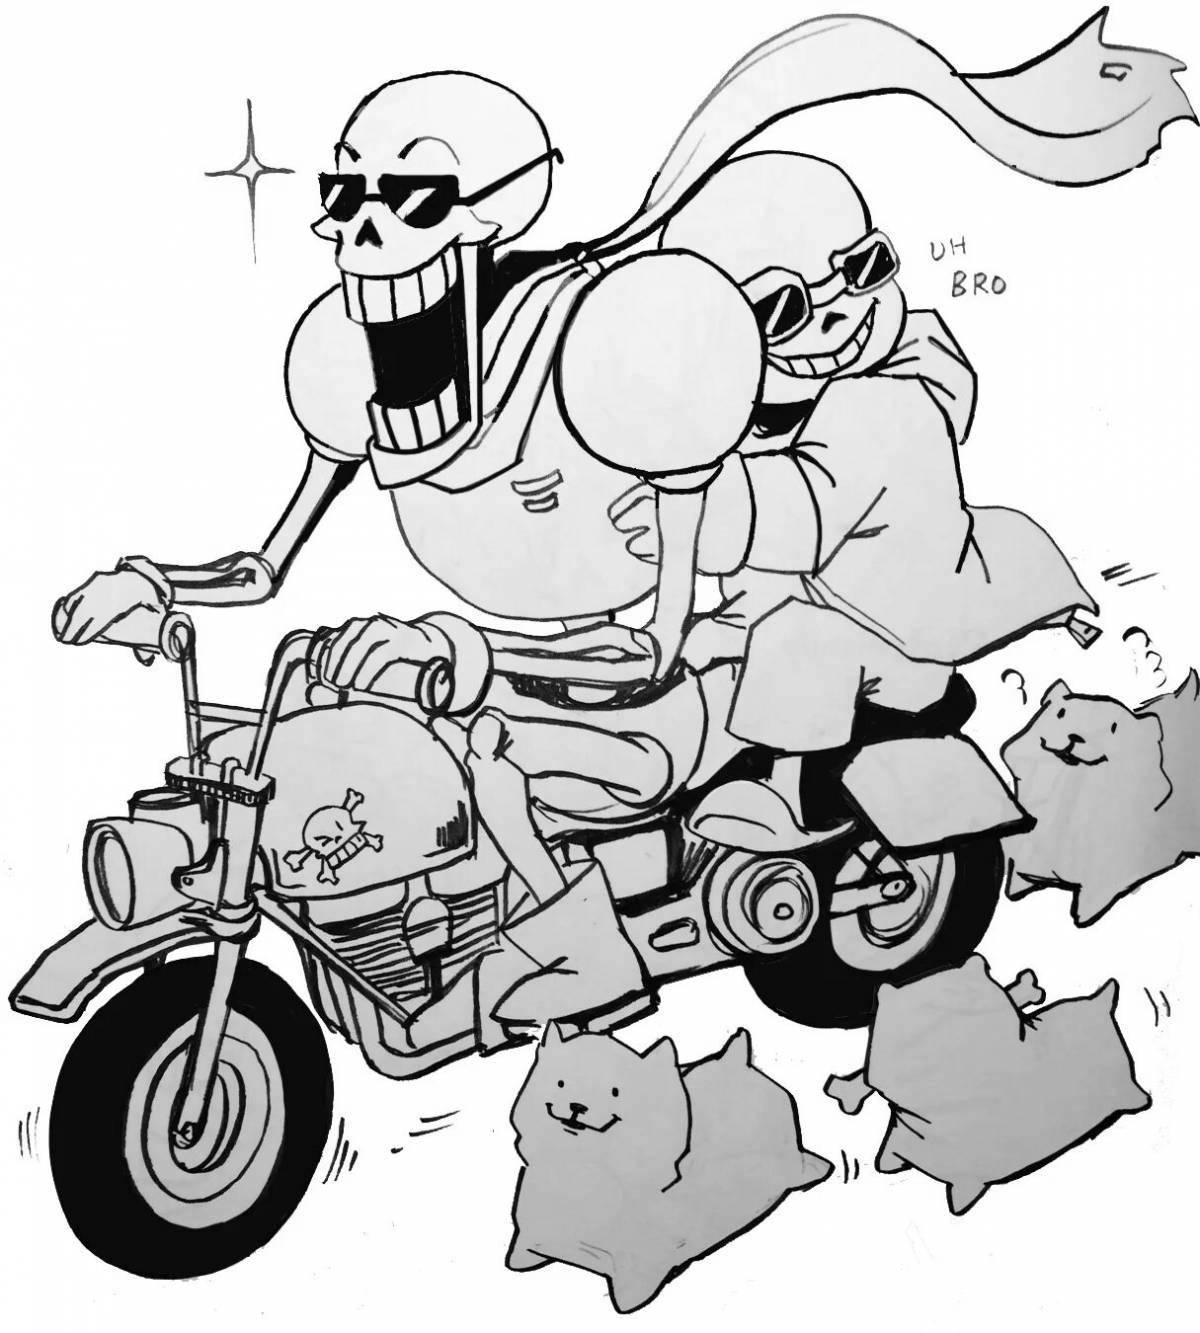 Lovely papyrus and sans coloring book